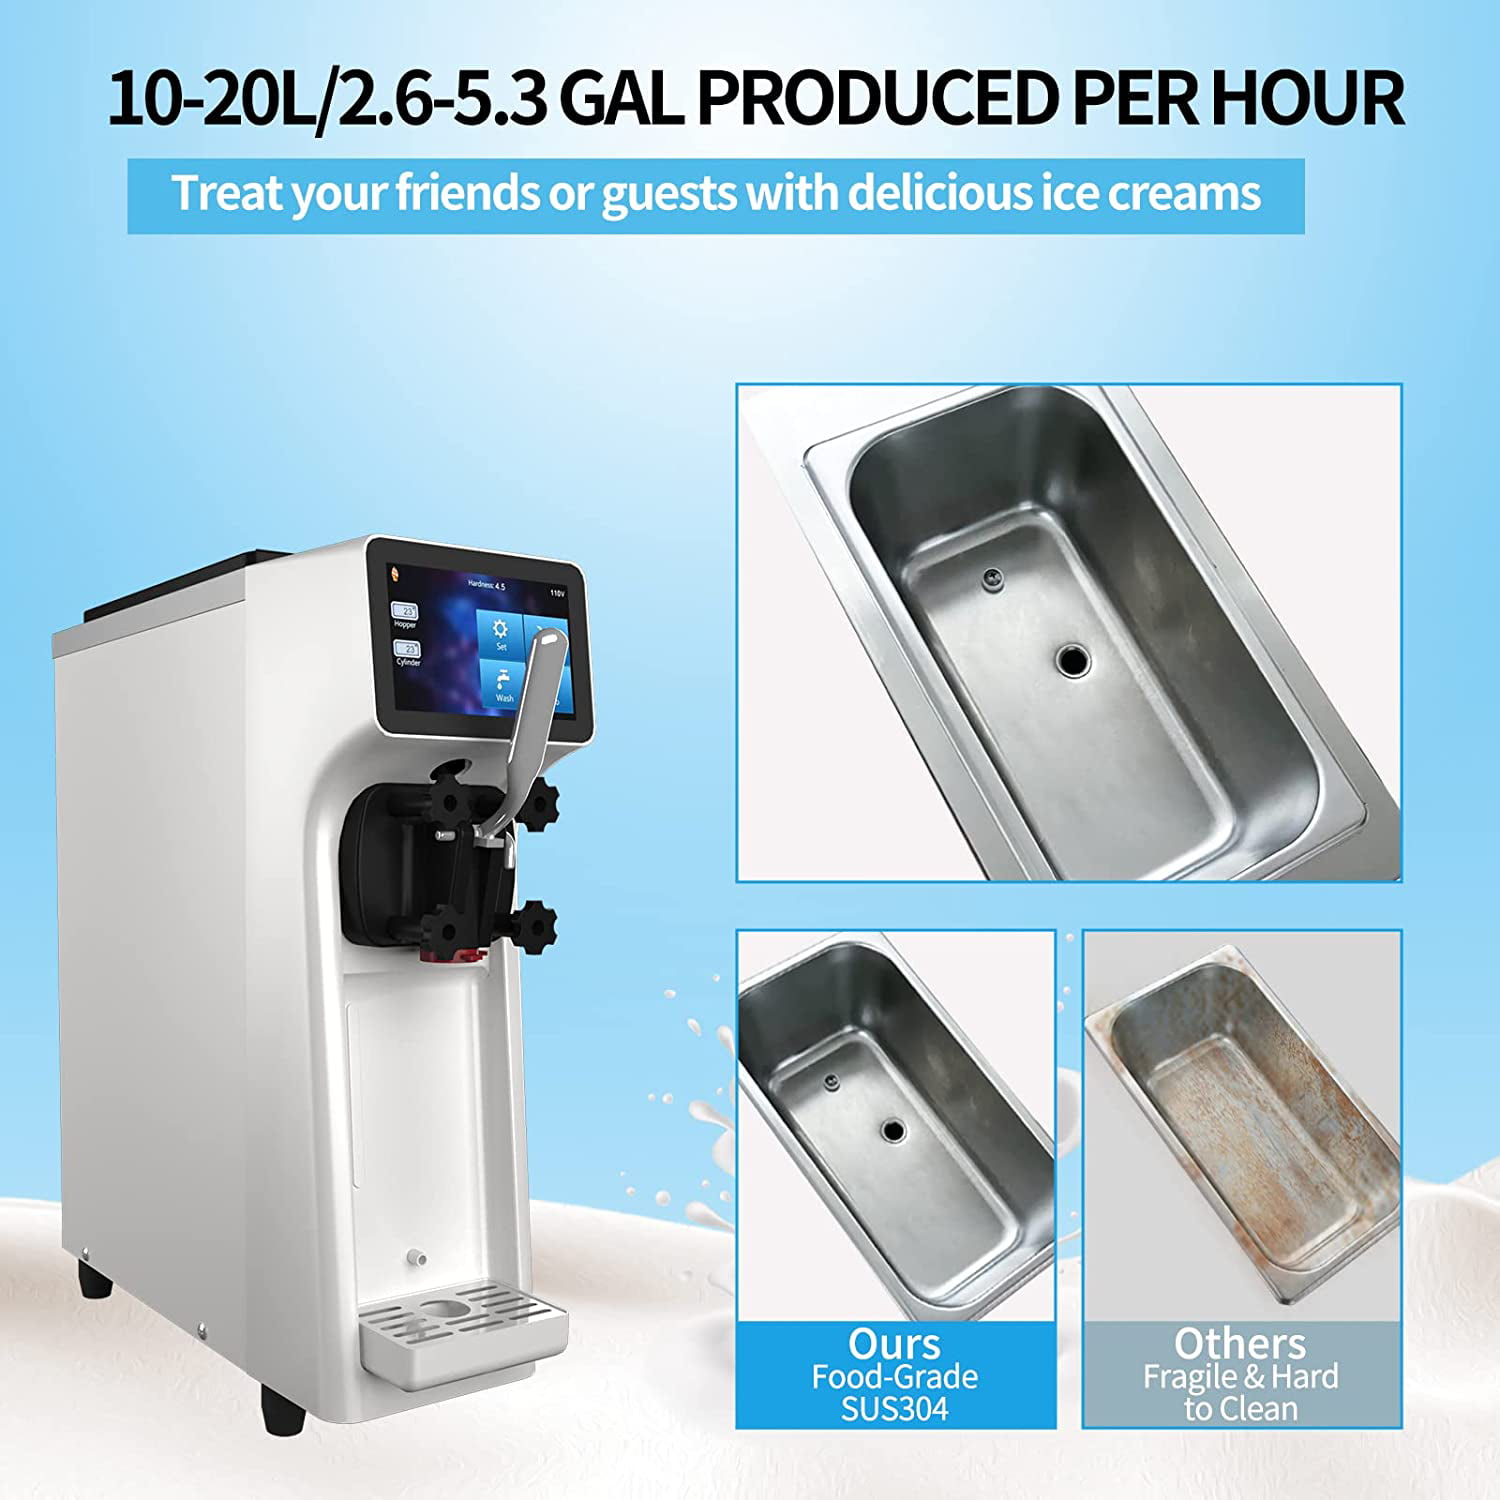 GSEICE Commercial Ice Cream Maker Mchine, 7 inch LCD Touch Screen 4.2 to 4.7 Gal/H Soft Serve Machine with Pre-Cooling Frequency Conversion, Soft